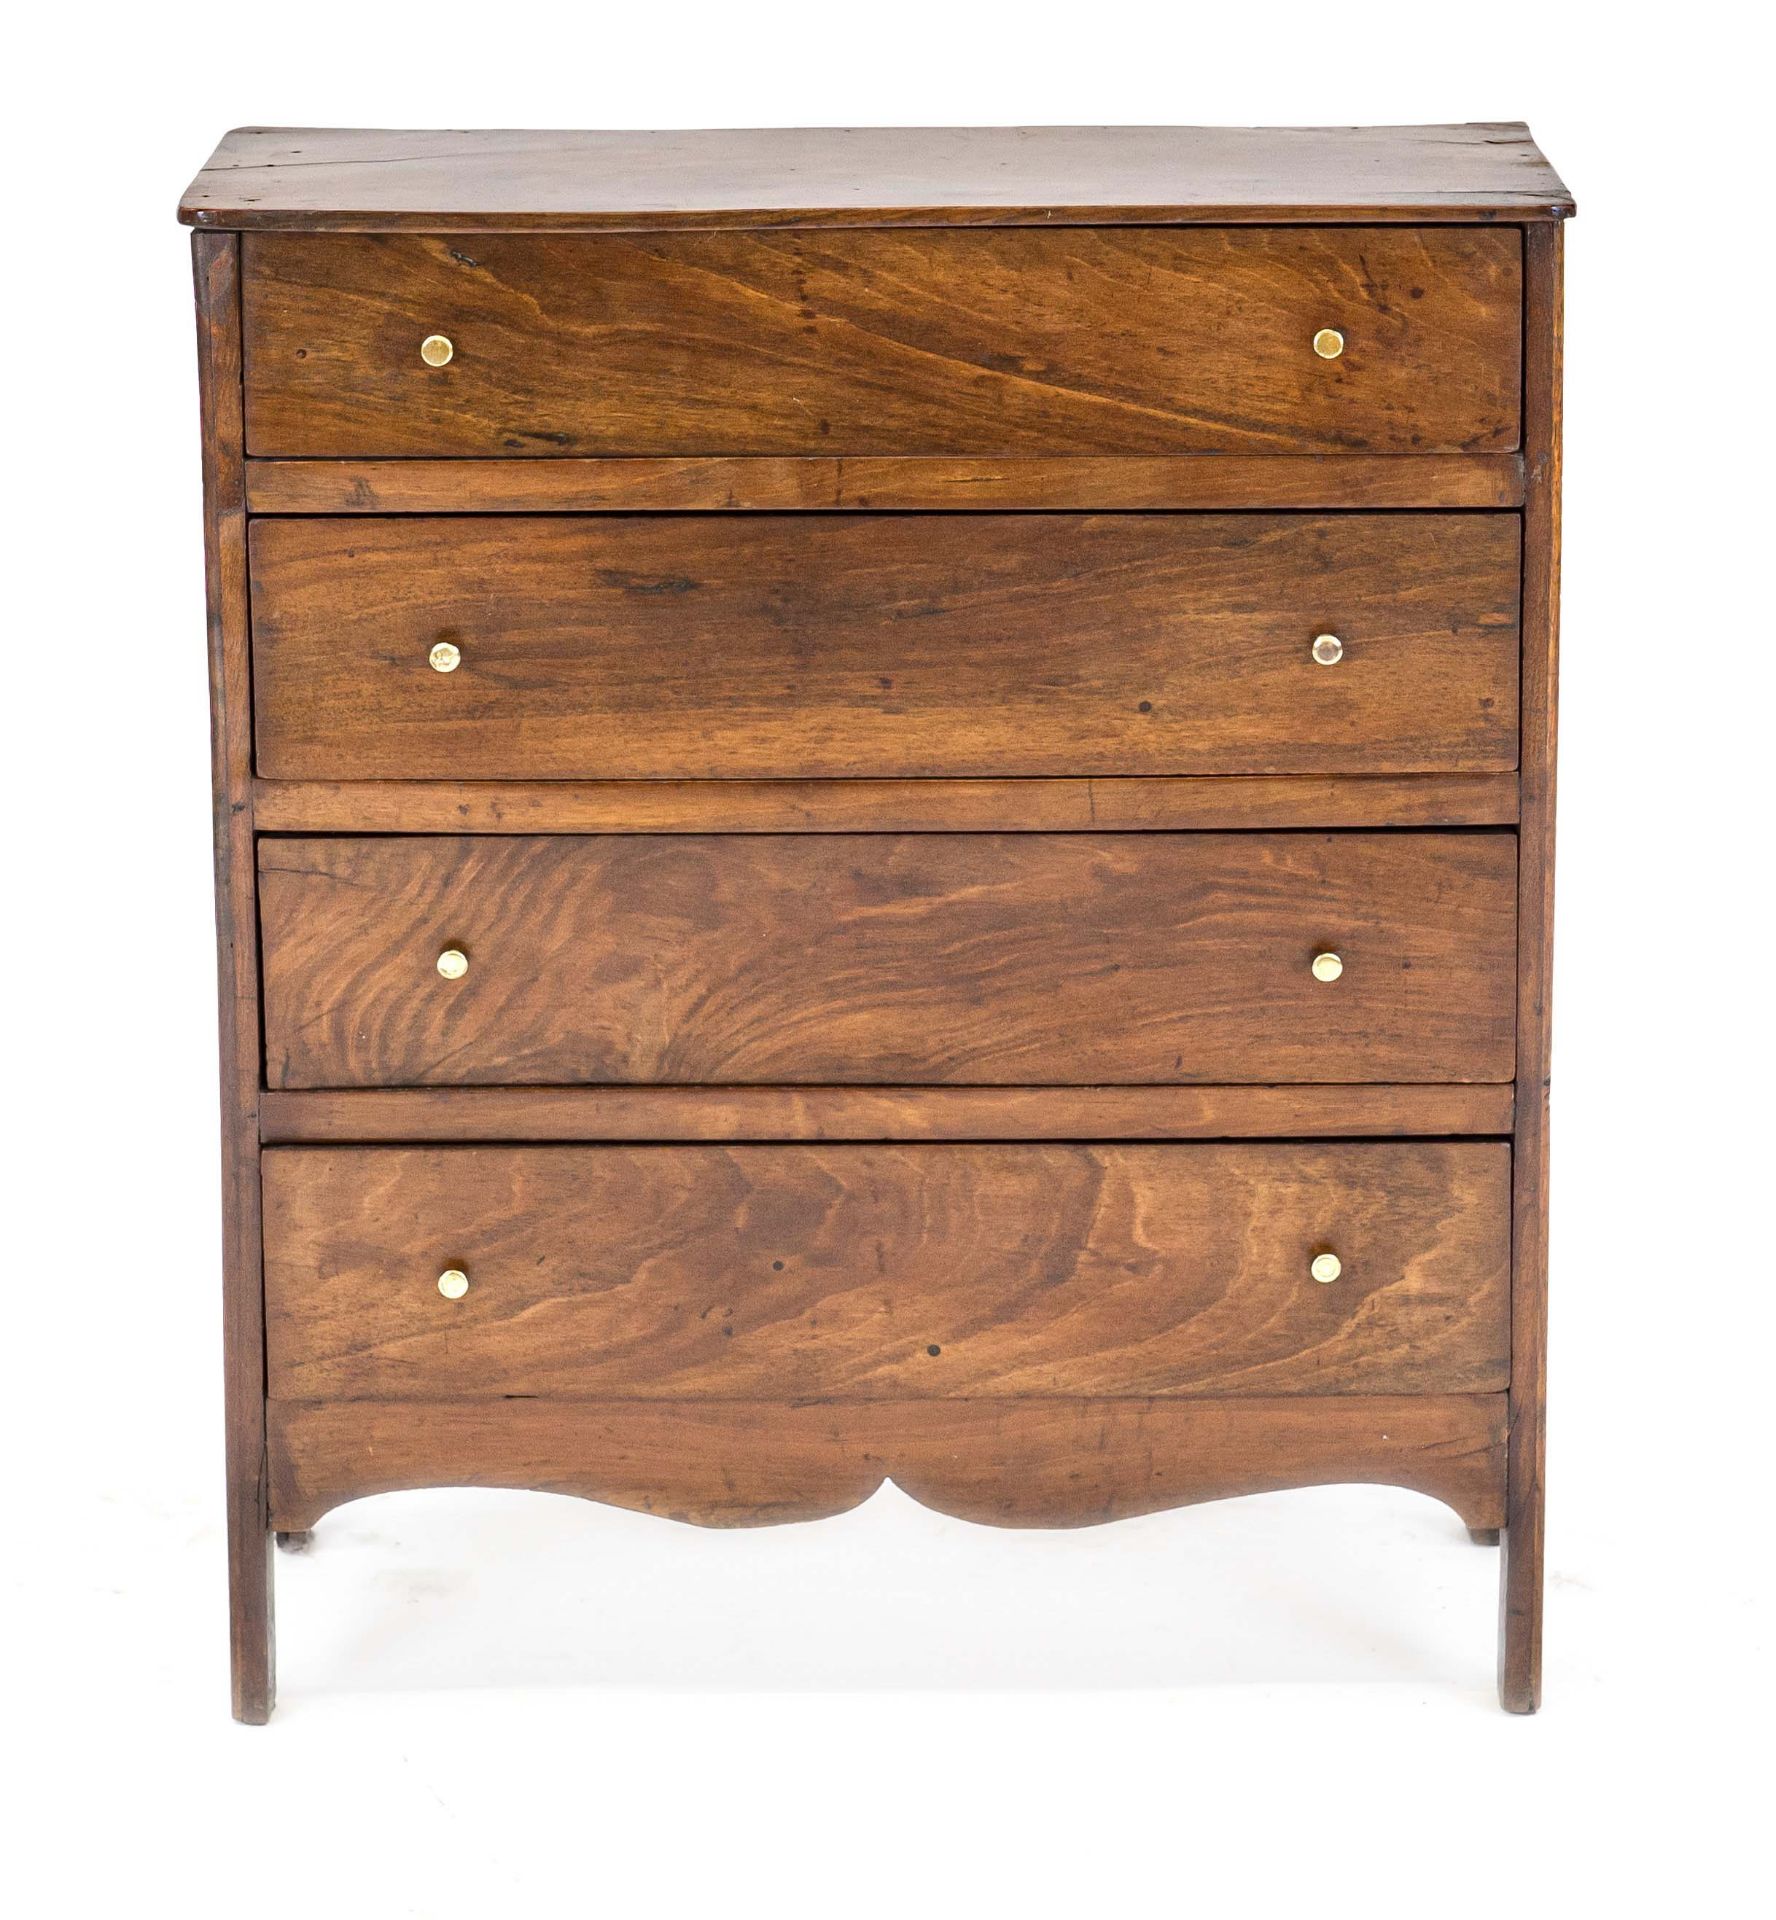 Small chest of drawers, England 19th century, mahogany, straight body with four drawers, 60 x 50 x